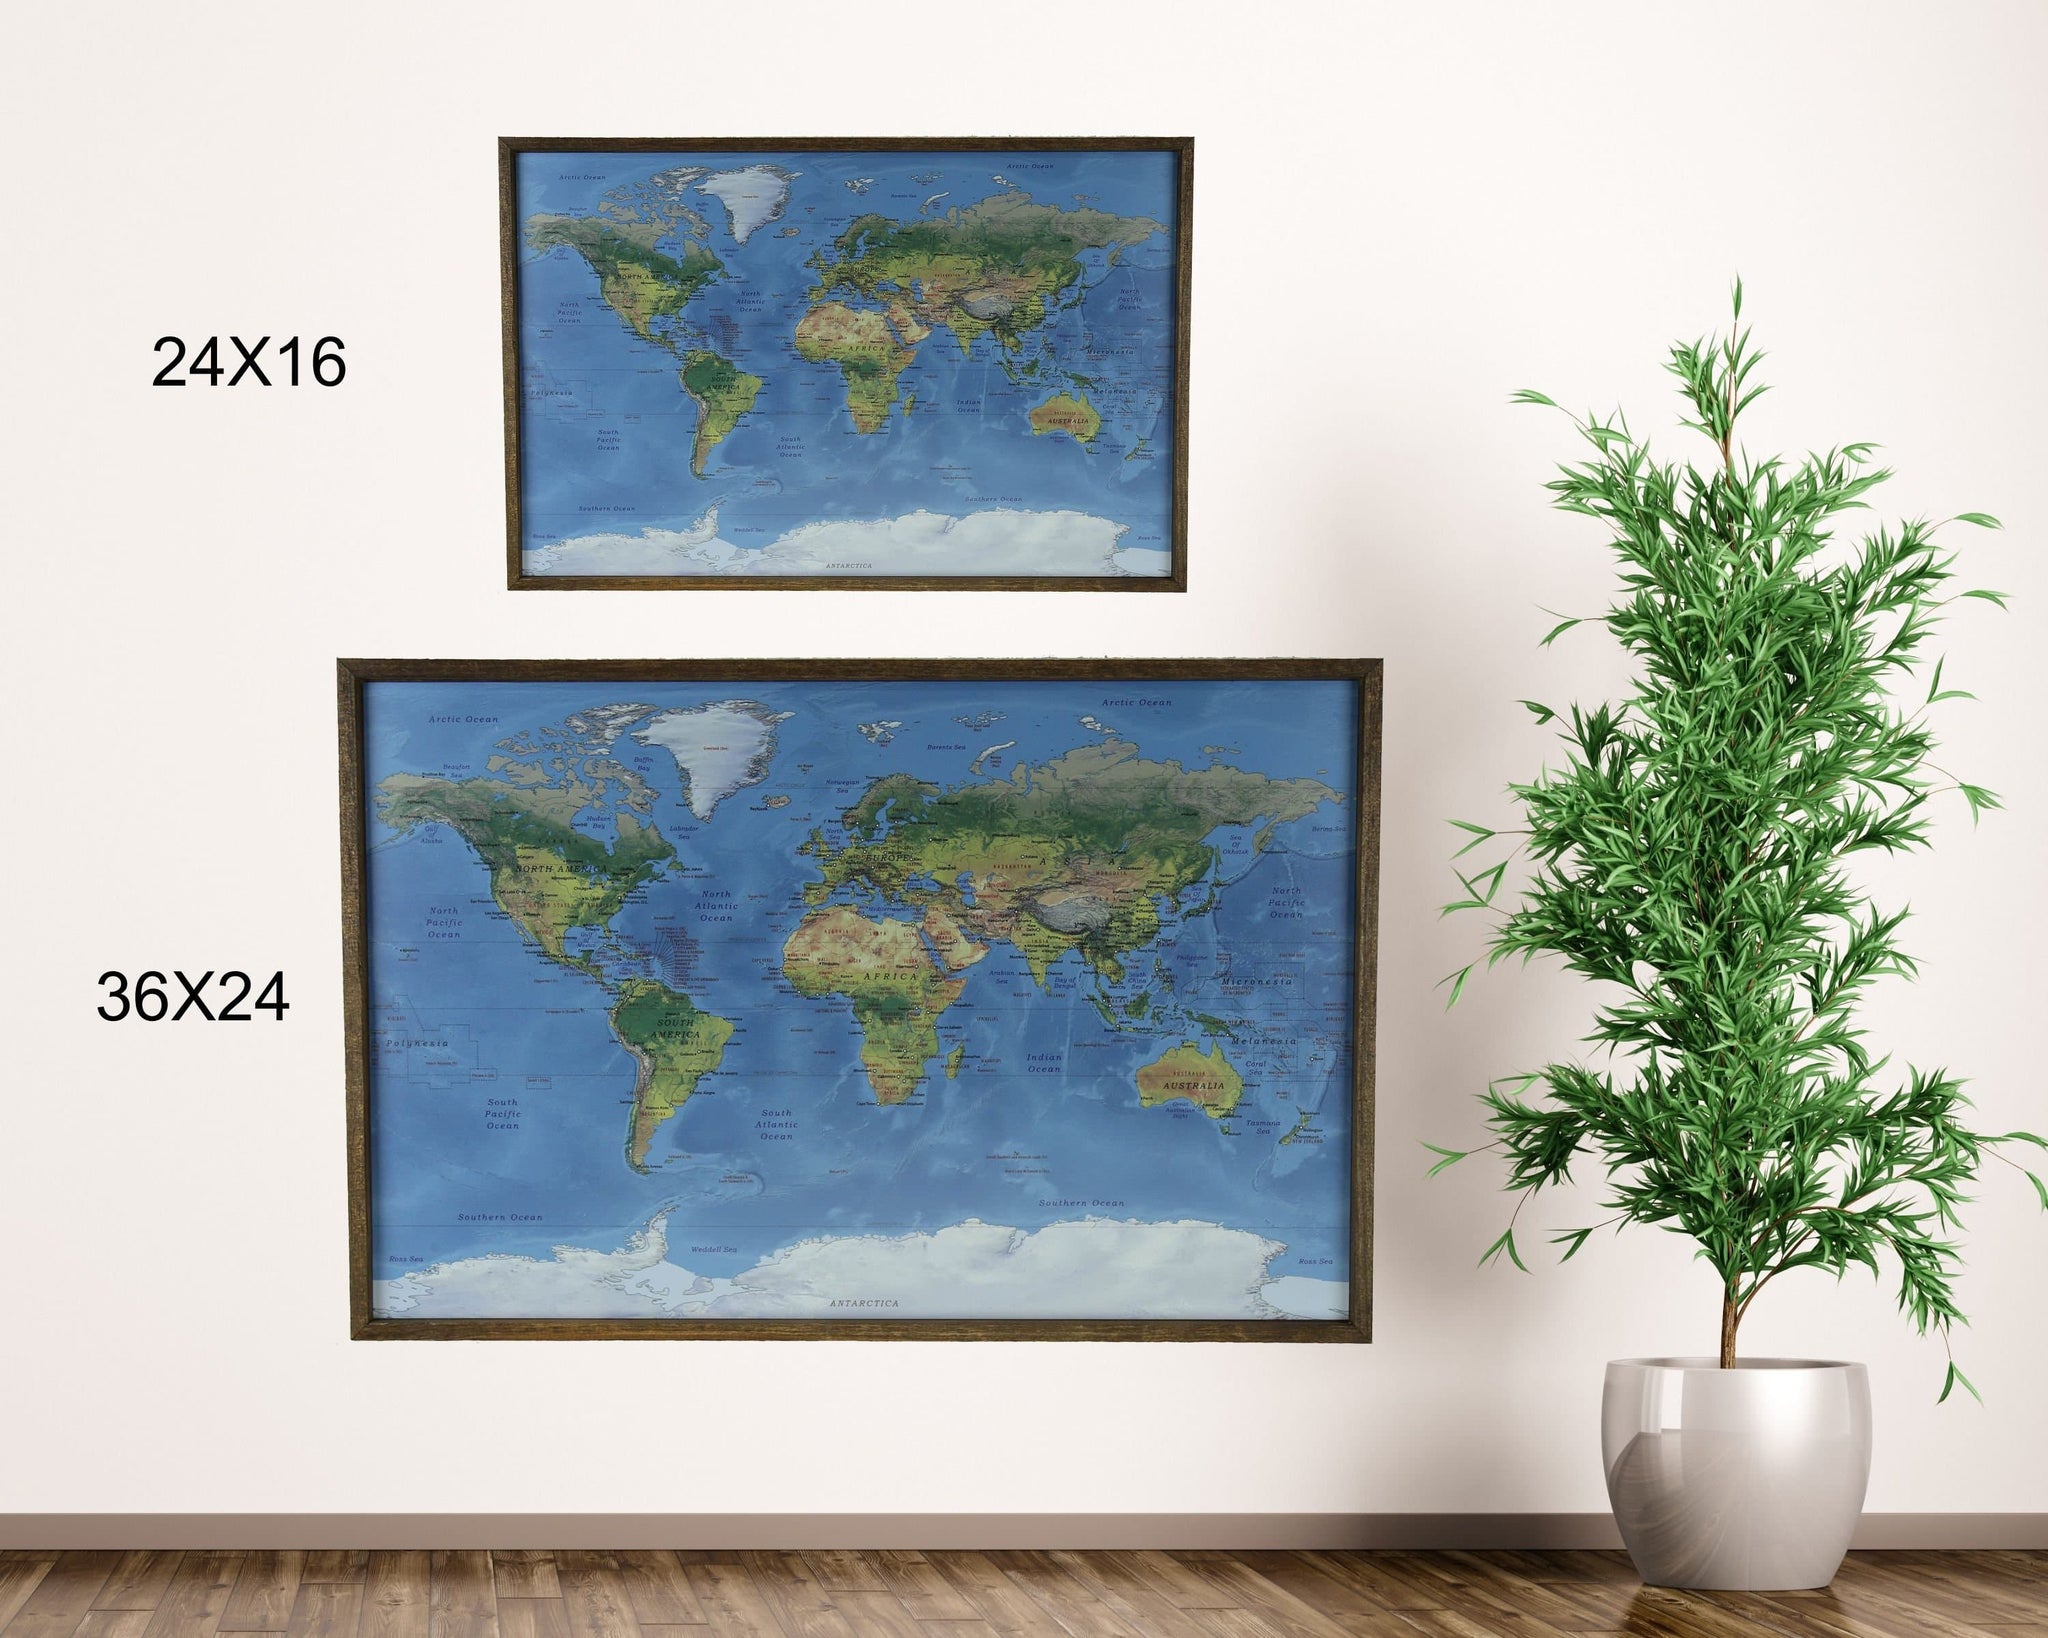 World Map Pinboard - Black Frame - Geographica